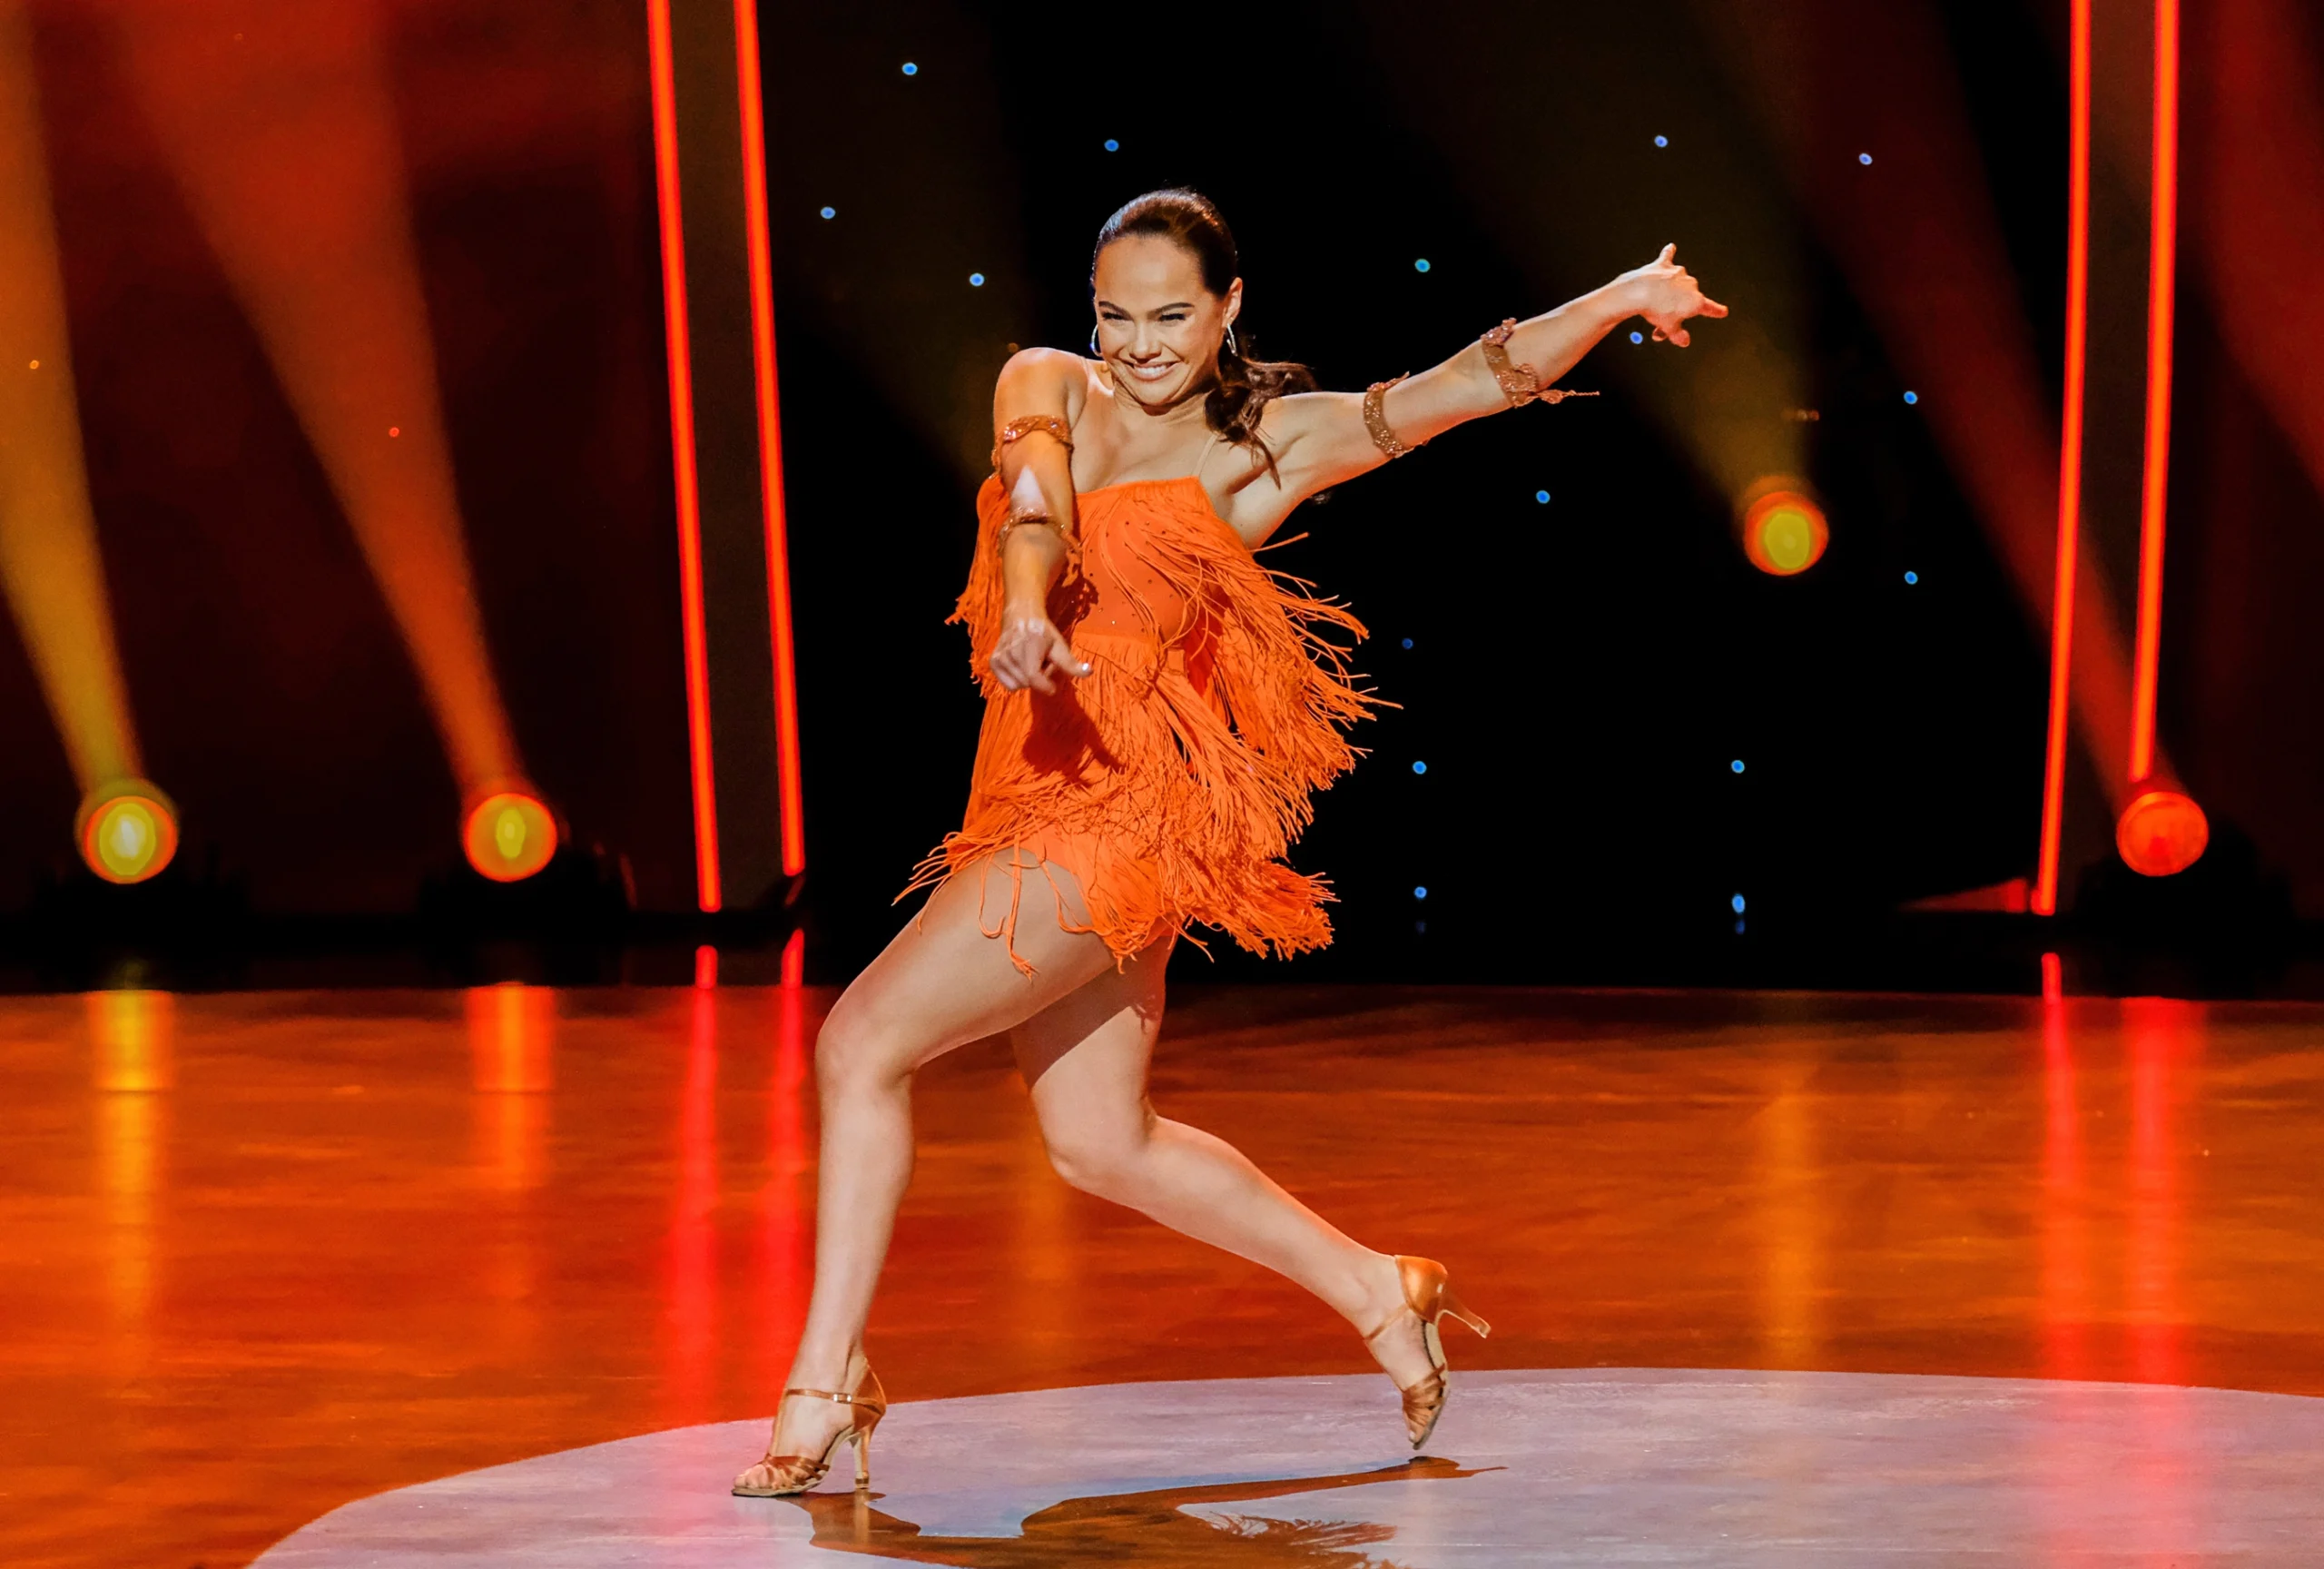 “So You Think You Can Dance” Season 17 champion Alexis Warr performing in an orange dress.